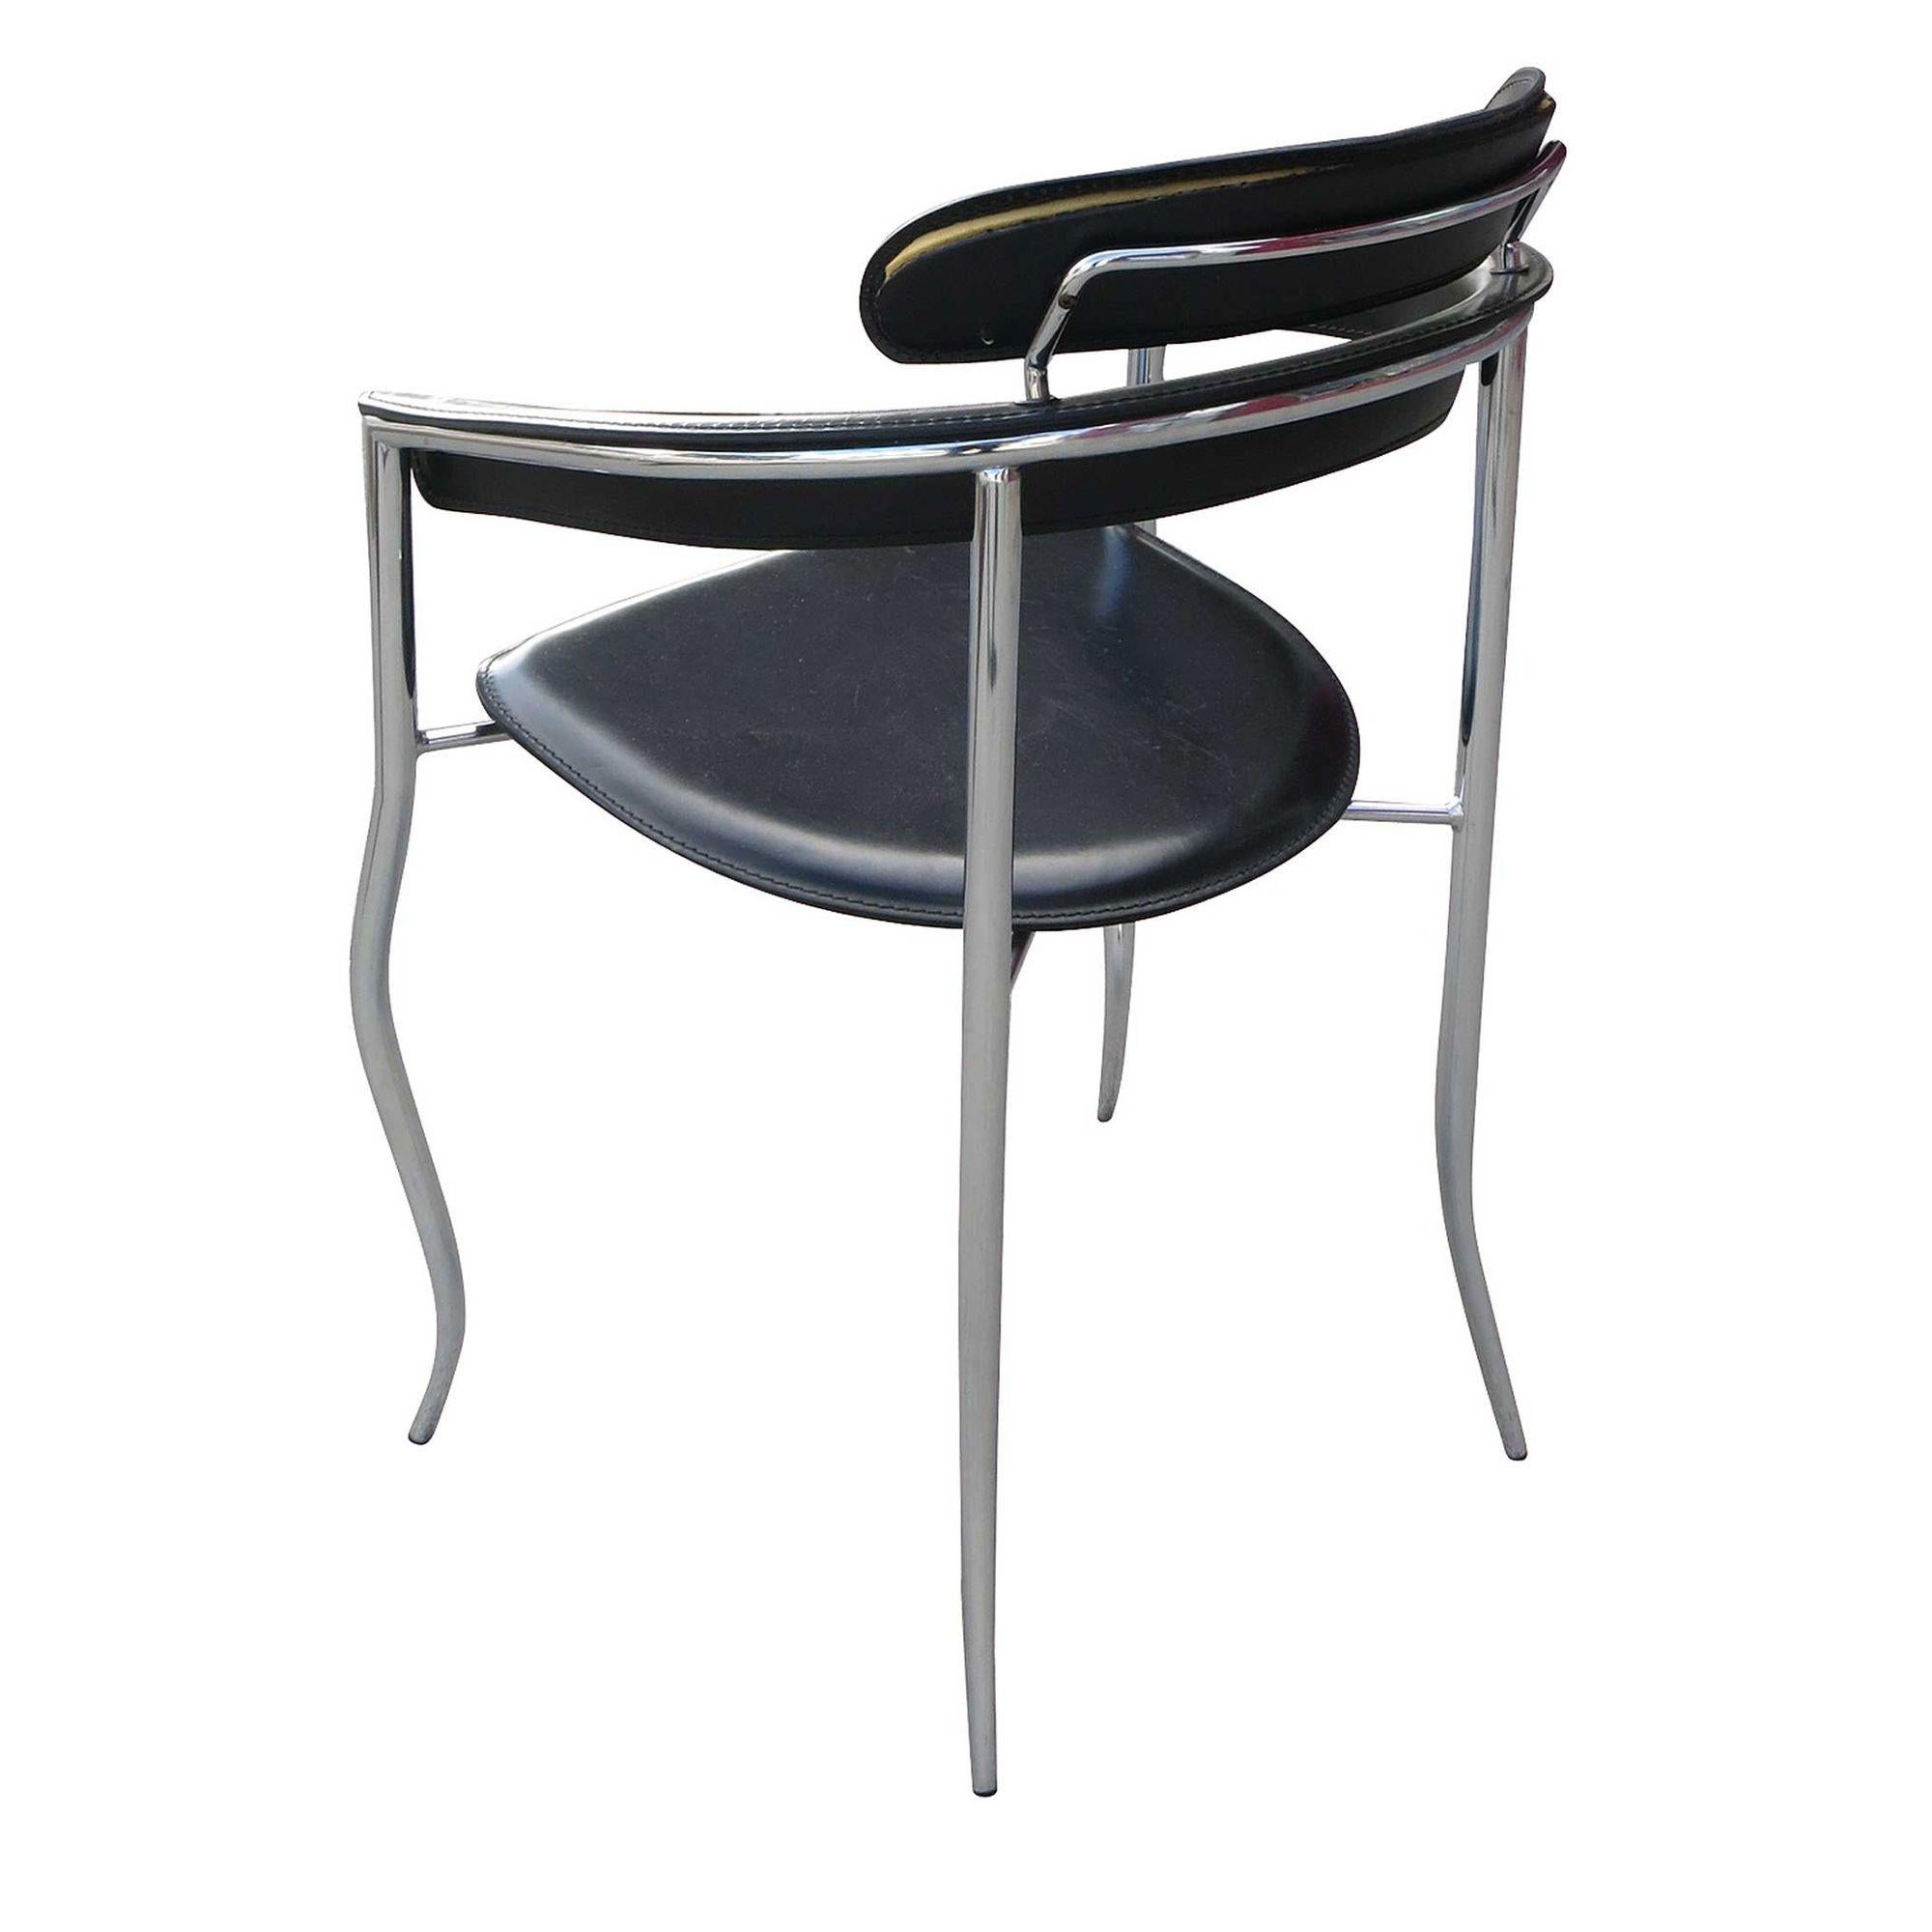 Steel Set of Four Stiletto Architectural Chairs by Arrben, Italy